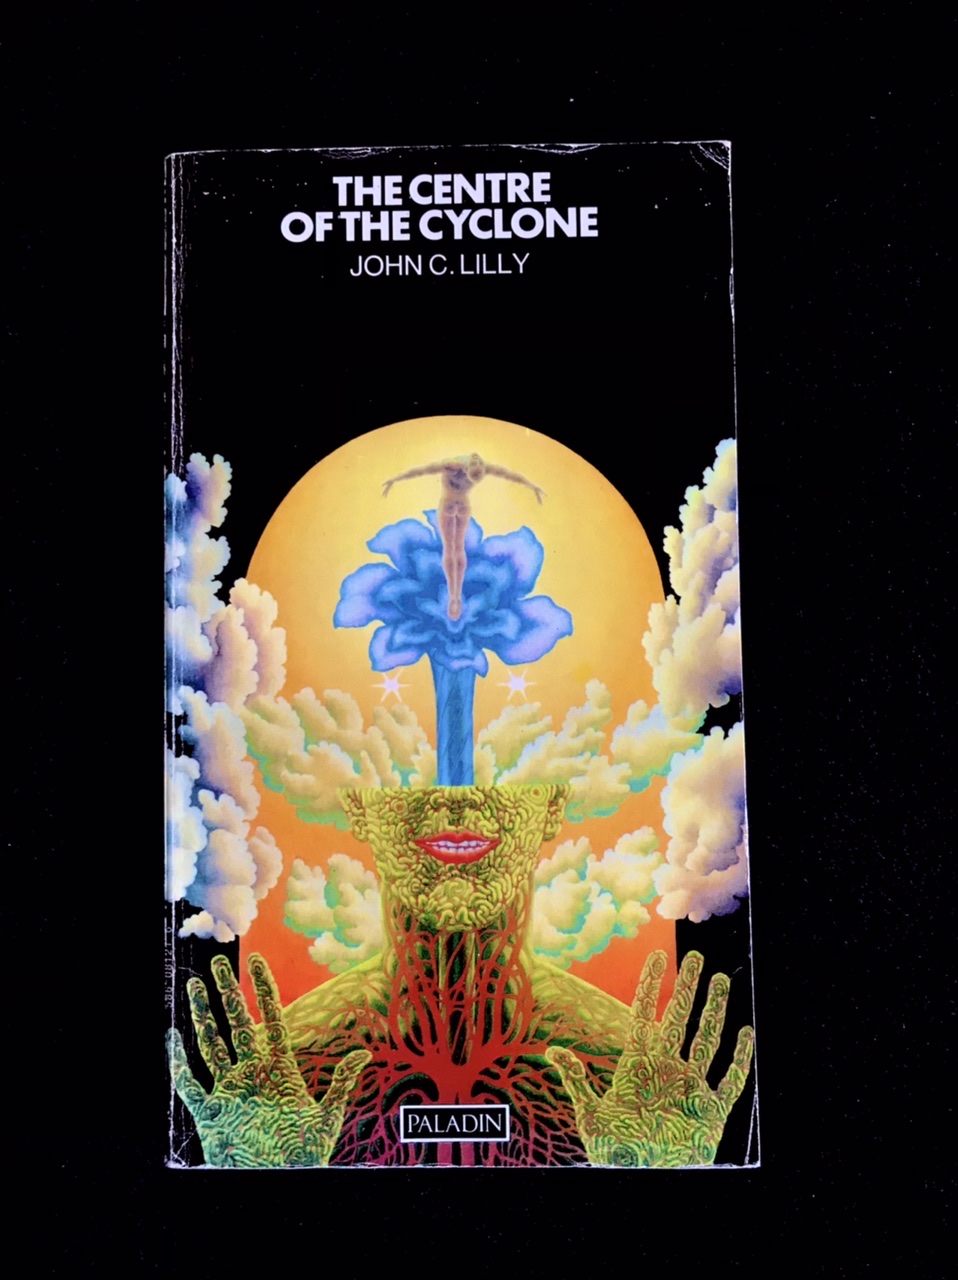 The Centre Of The Cyclone by John C. Lilly